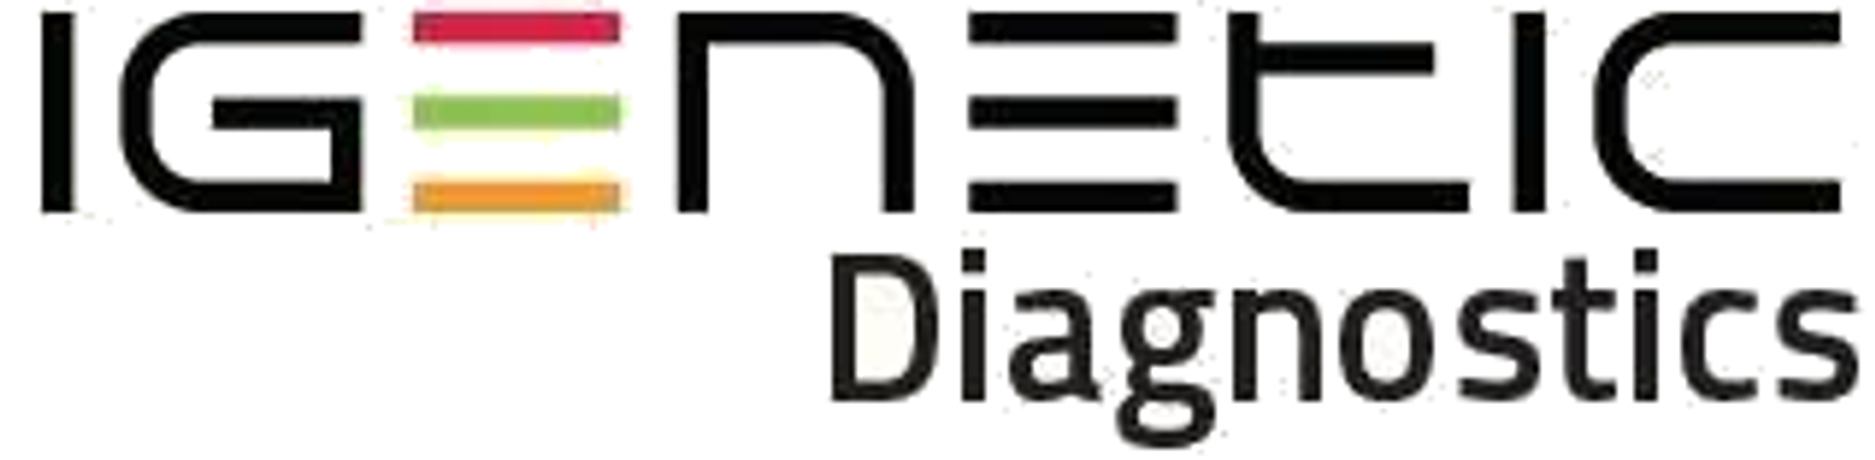 iGenetic - Oncology Cancer Diagnostics Analysis Services